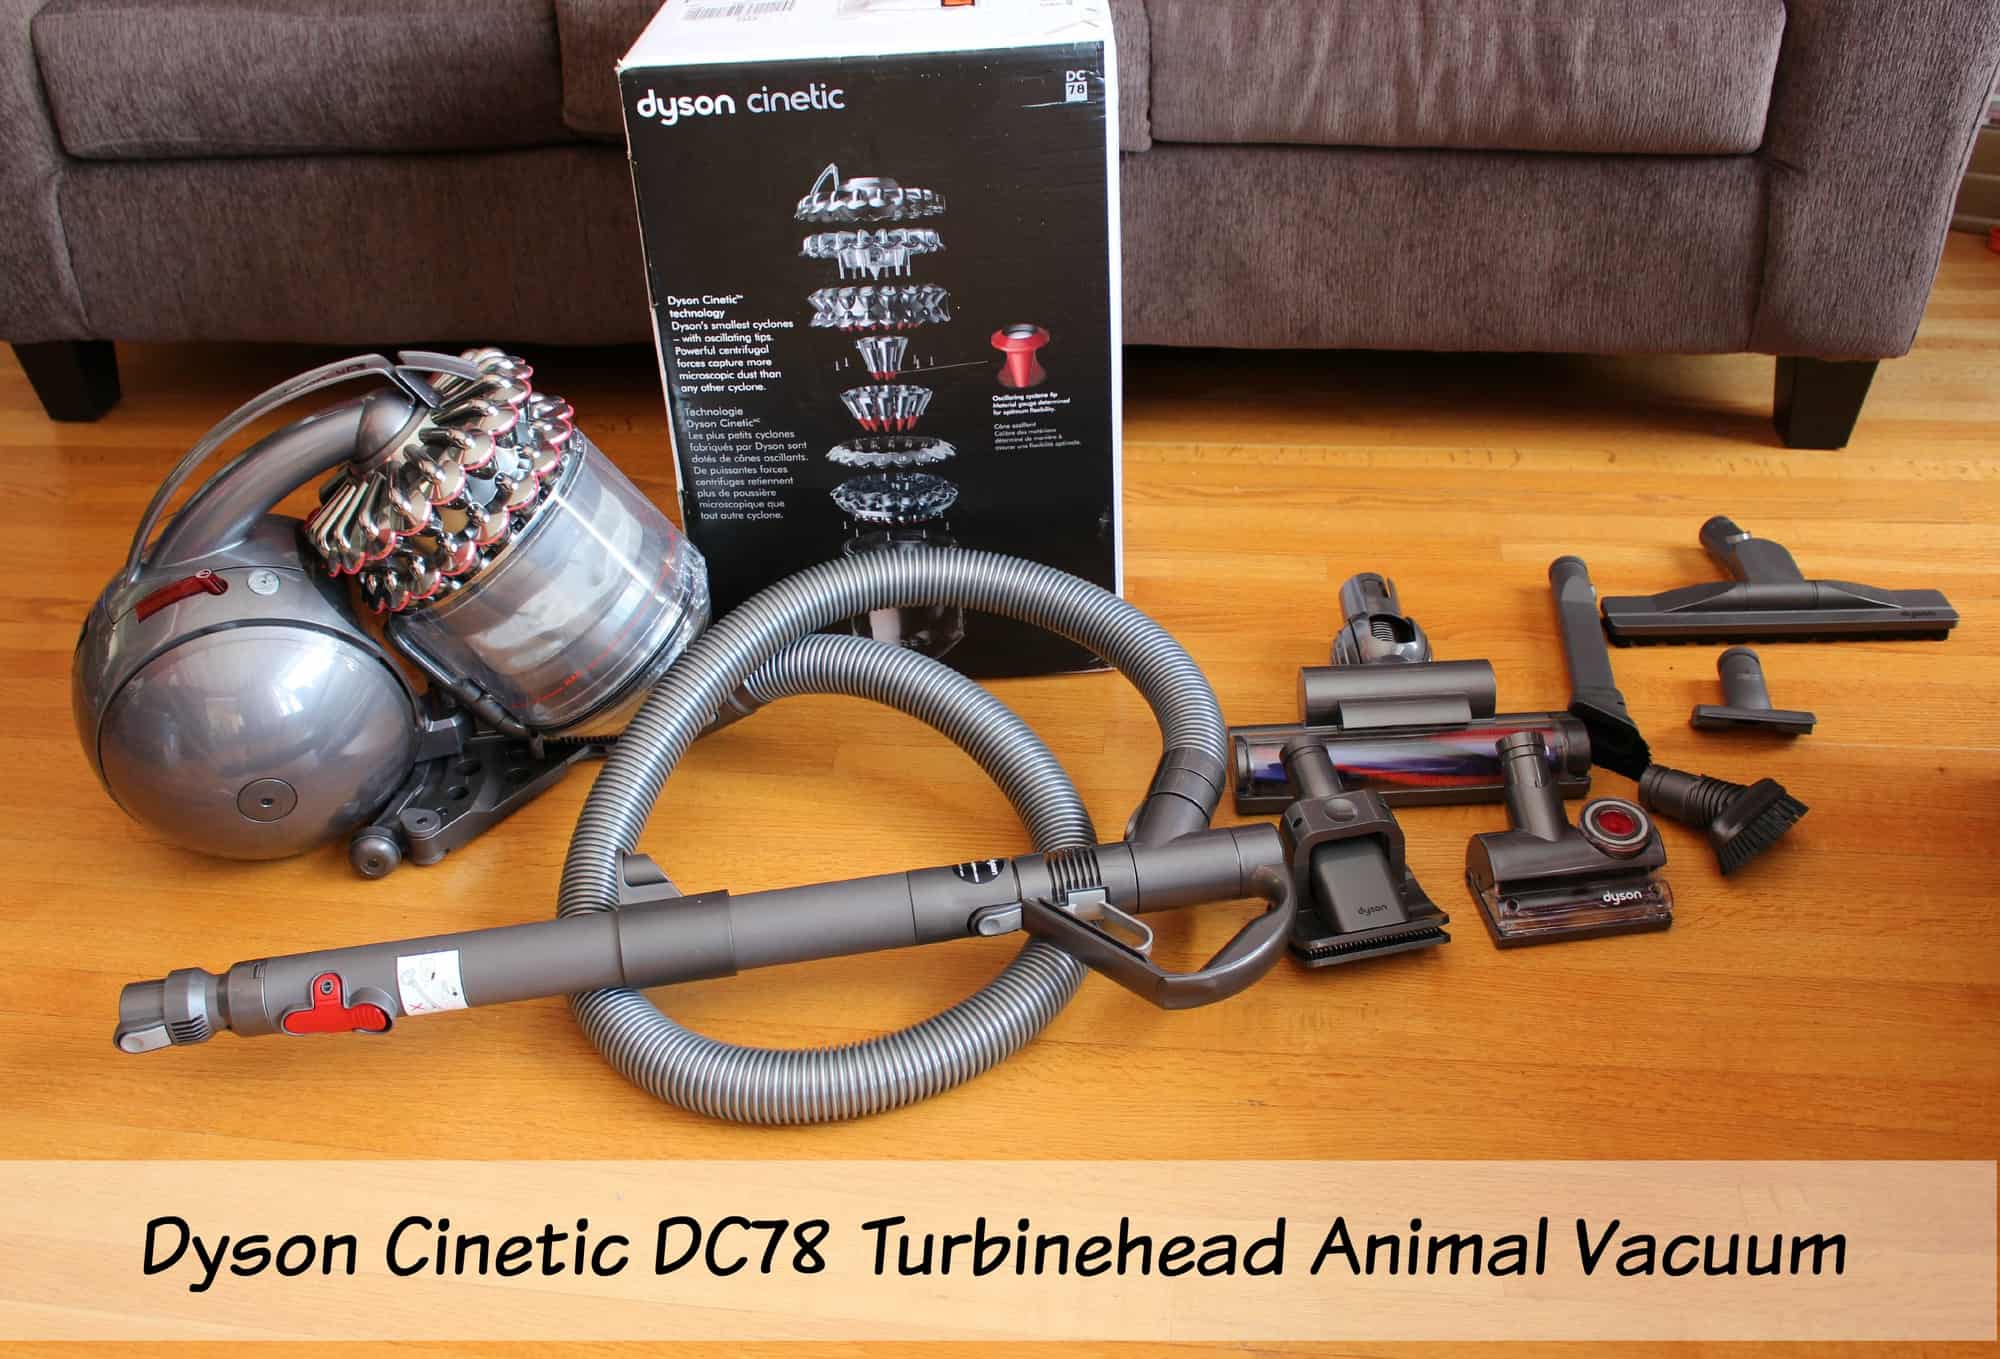 Get Rid of Hair Around Your House - Dyson Cinetic DC78 Turbinehead Animal  Vacuum Review - The Exploring Family